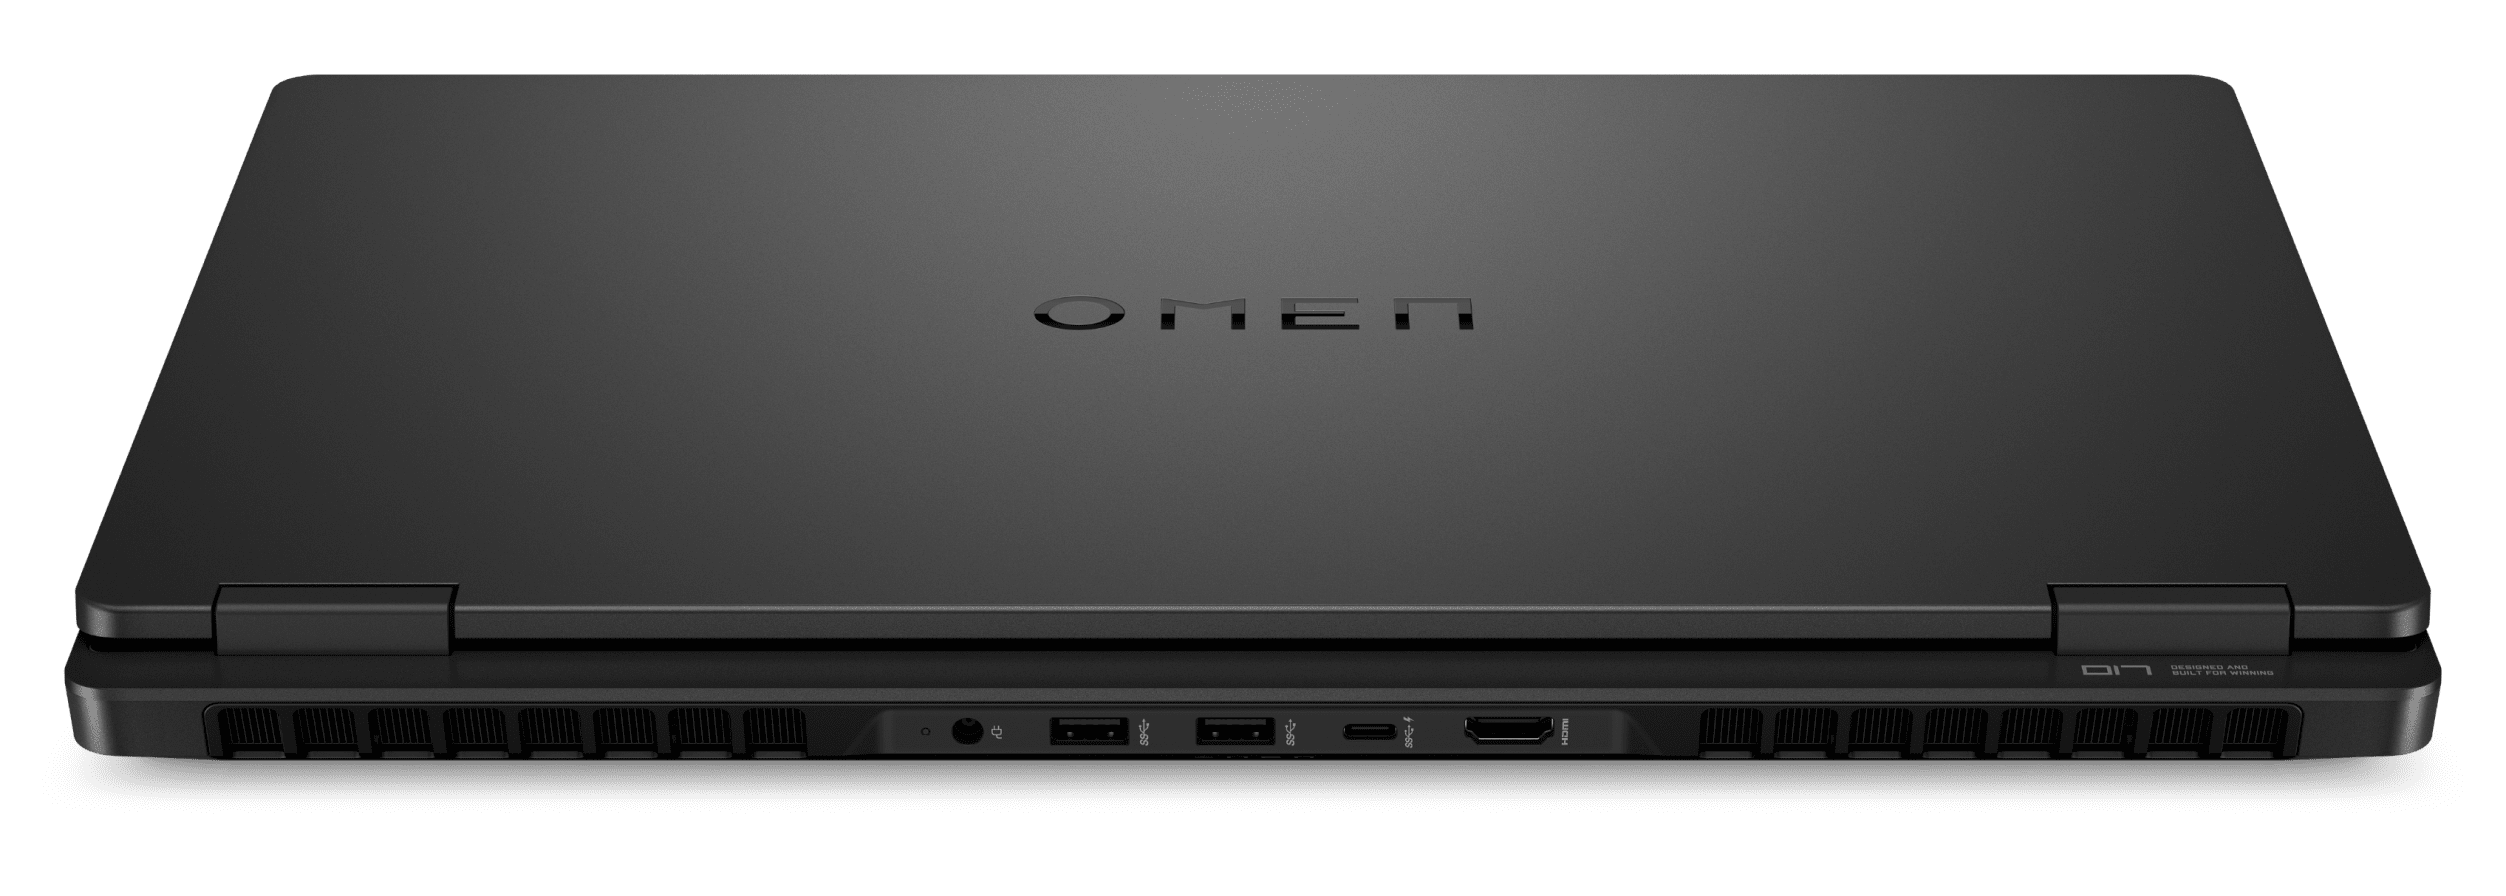 REAR FACING OMEN 17 AMD GAMING LAPTOP SHOWING PORTS AND VENTING